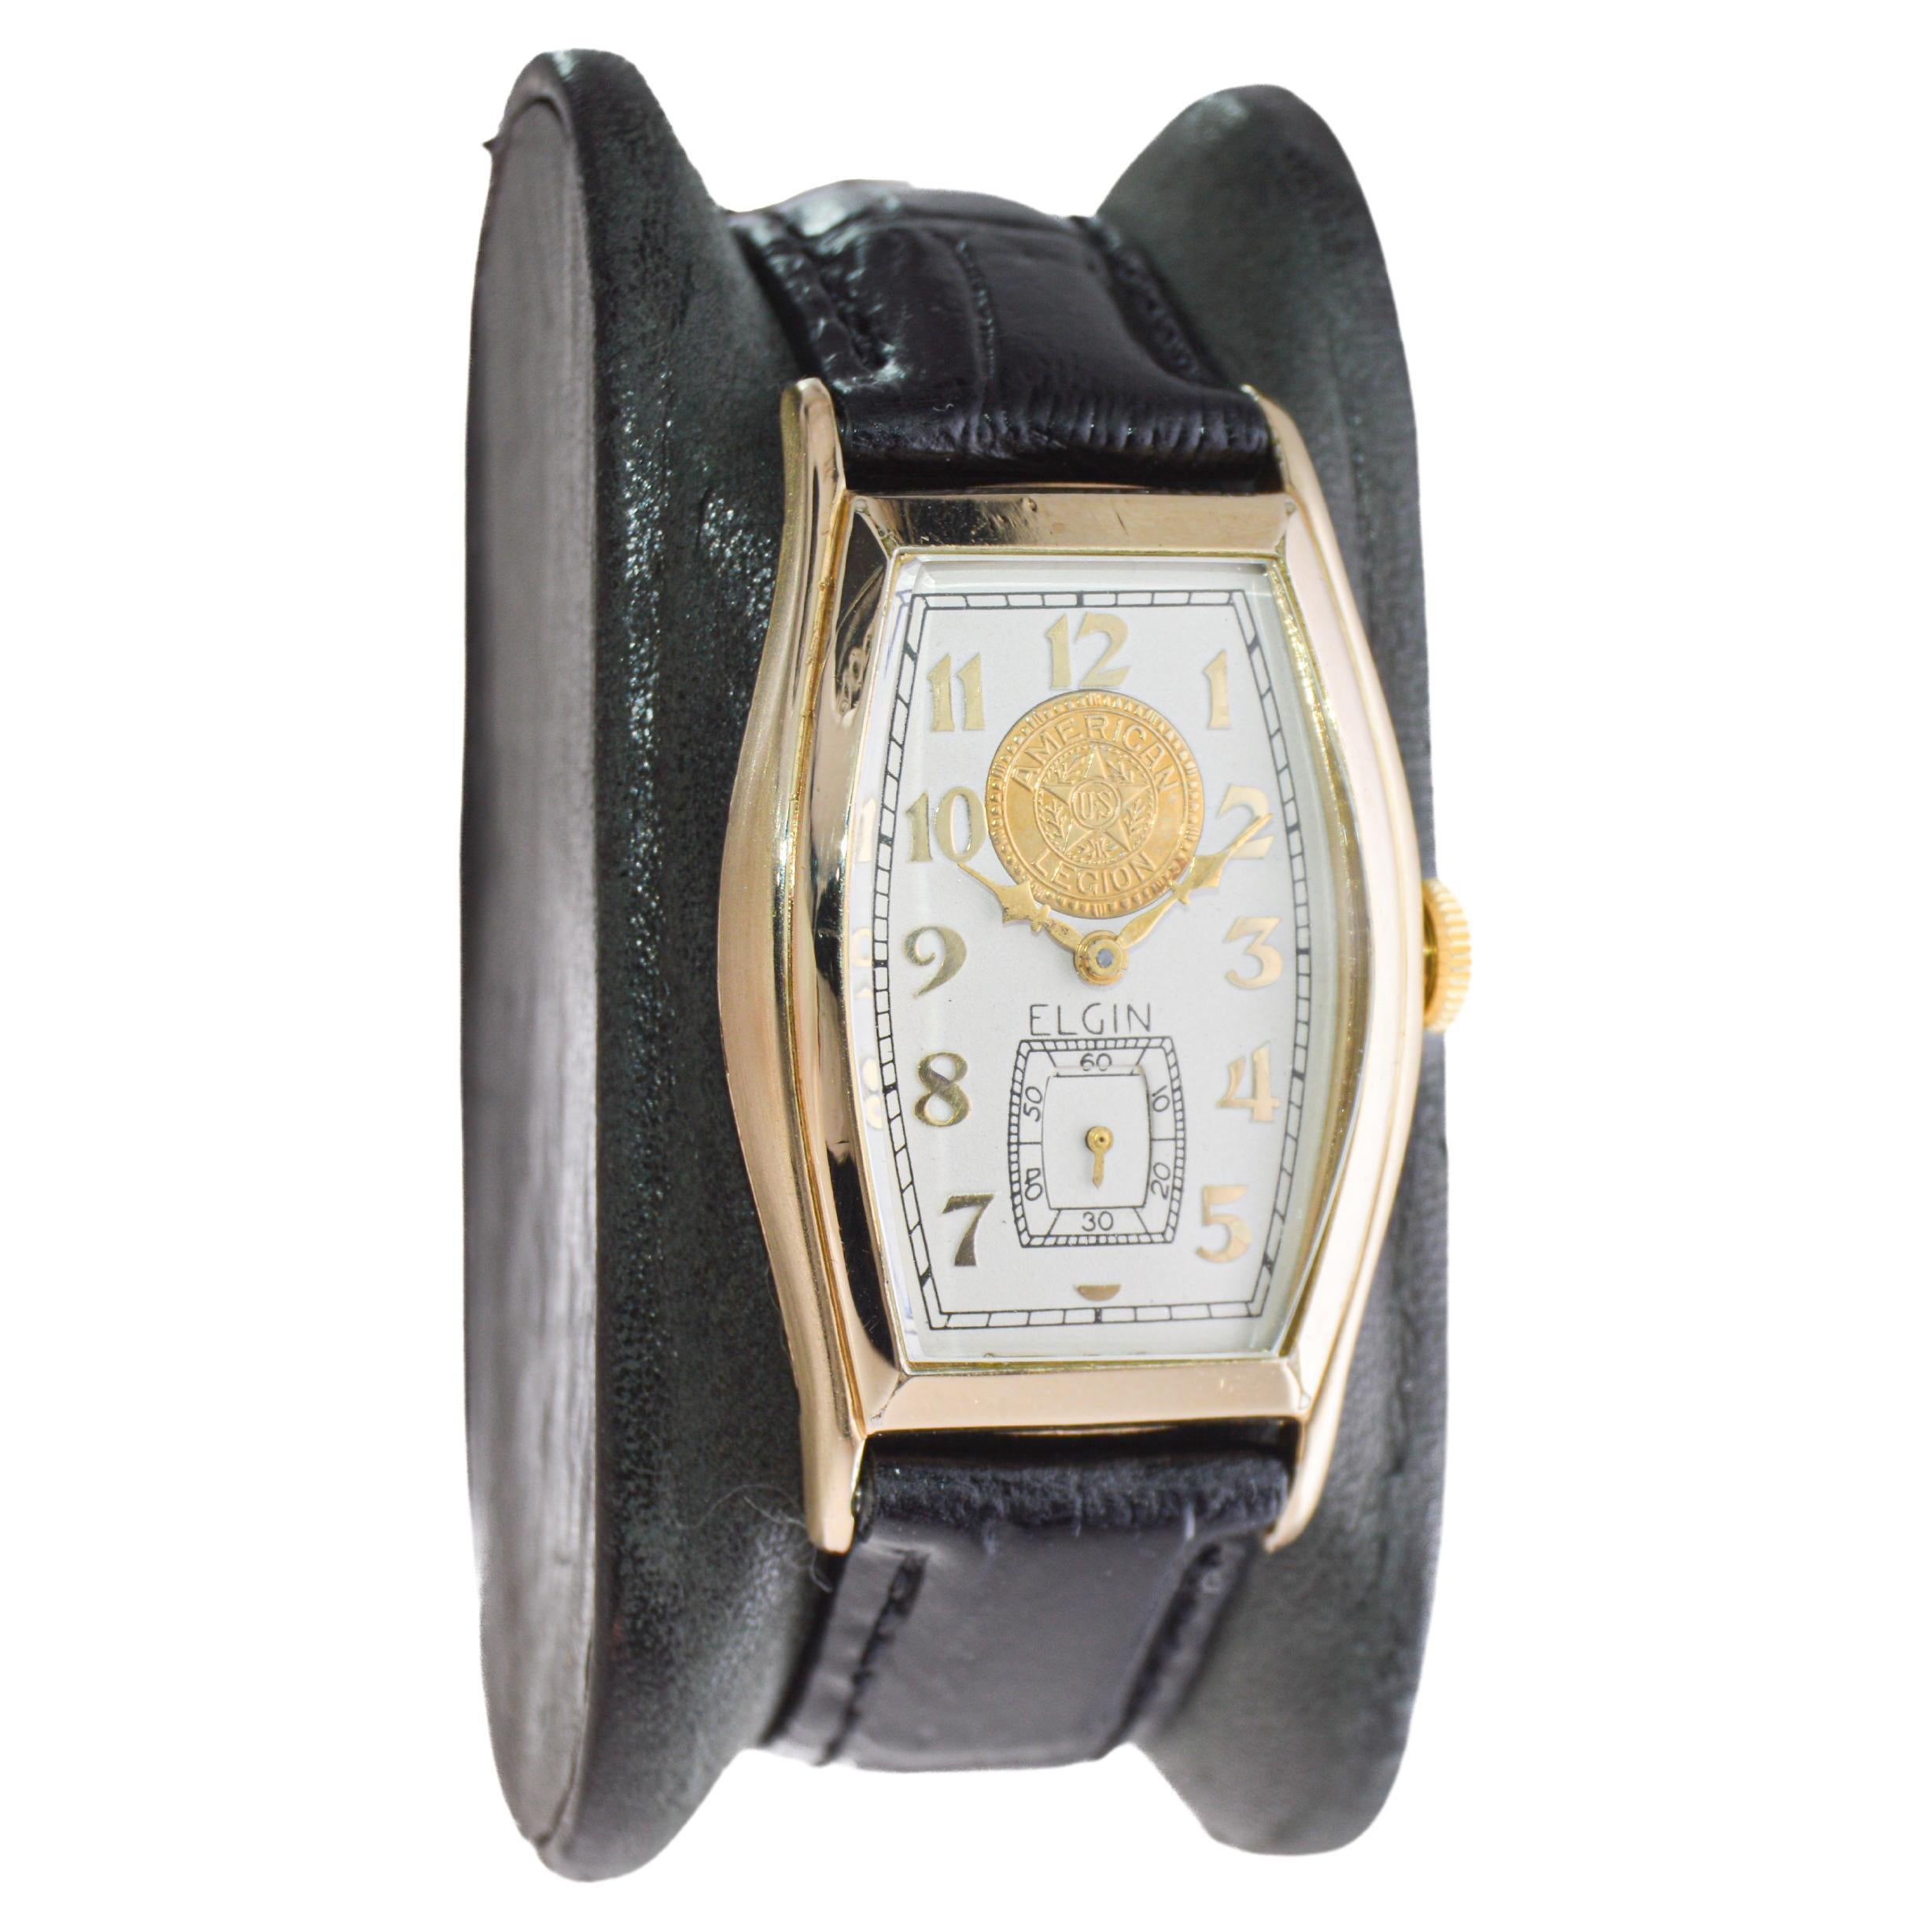 FACTORY / HOUSE: Elgin Watch Company
STYLE / REFERENCE: Art Deco / Tortue Shape
METAL / MATERIAL: Yellow Gold Filled
CIRCA / YEAR: 1939
DIMENSIONS / SIZE: Length 25mm X Diameter 42mm
MOVEMENT / CALIBER: Manual Winding / 15 Jewels / Caliber 554
DIAL